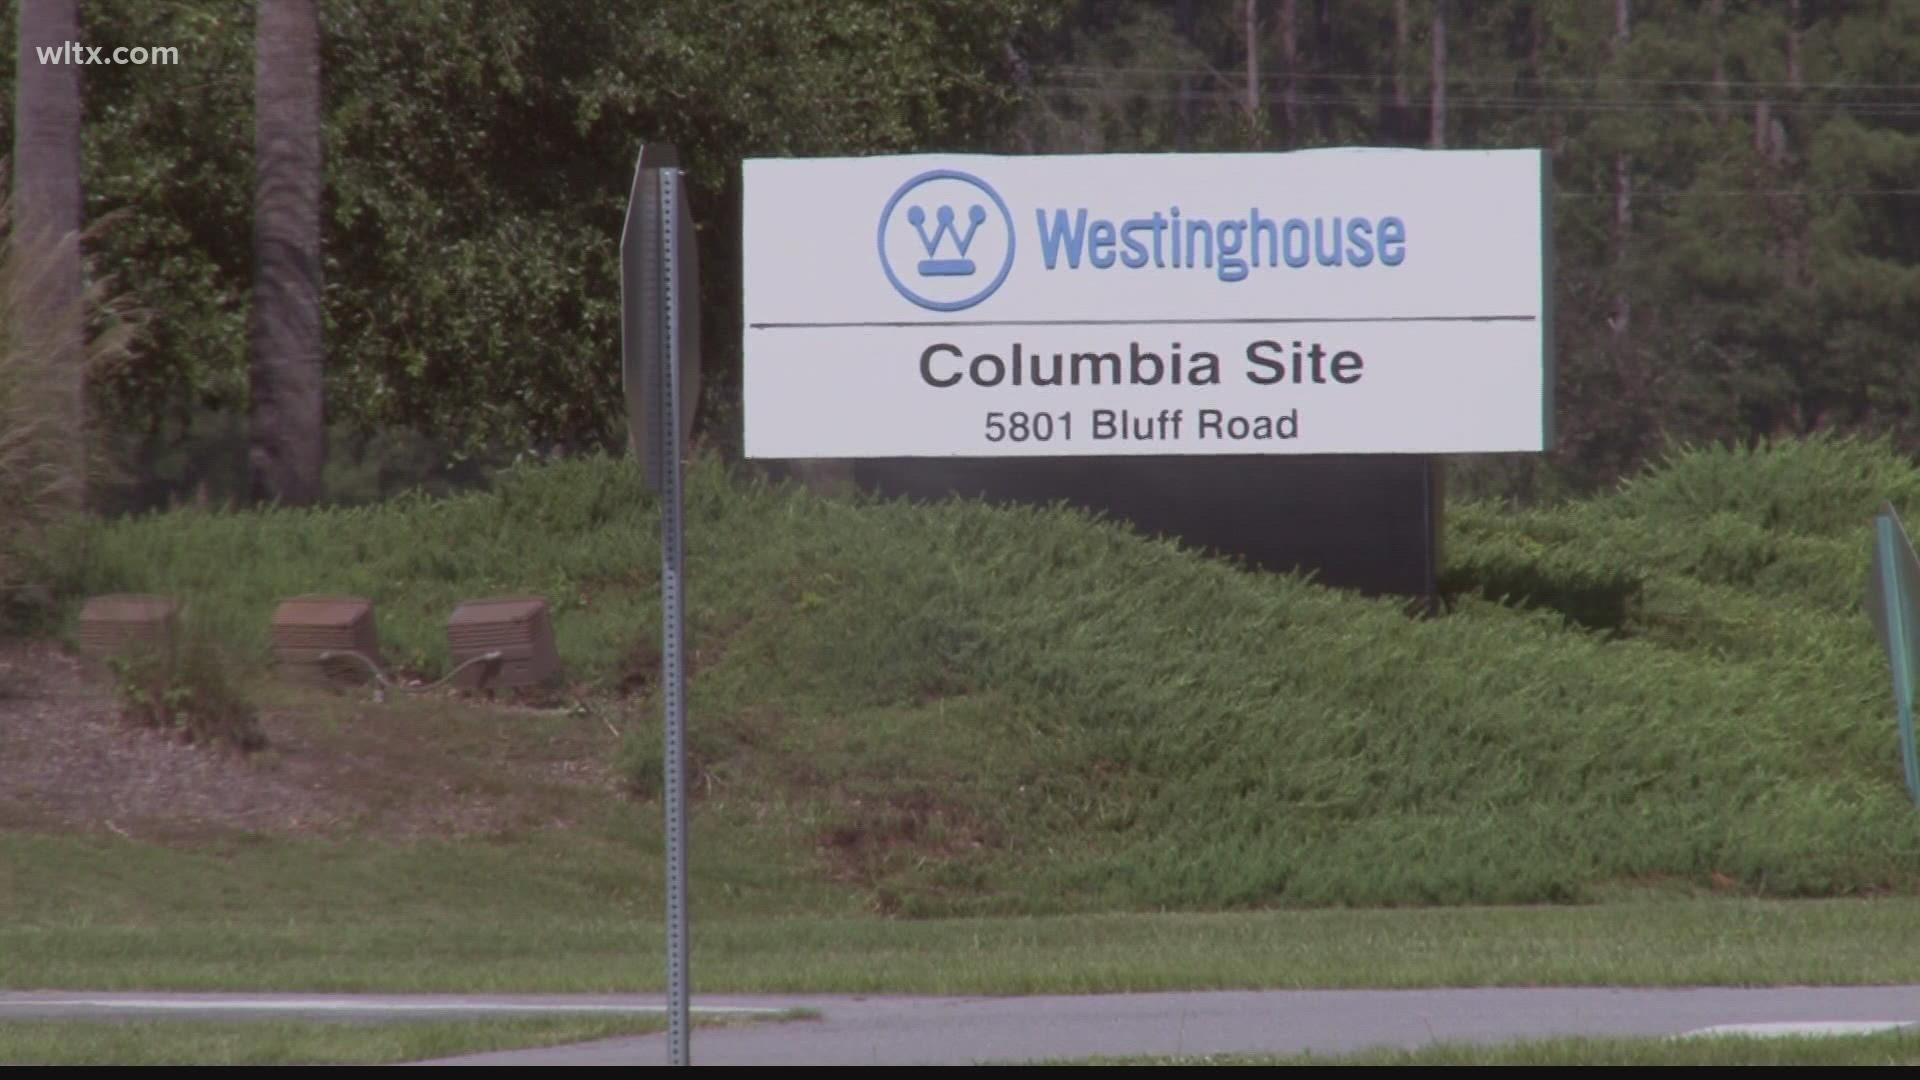 Richland County Council on Tuesday unanimously voted to approve a $131 million agreement for the expansion and upgrade of Westinghouse Electric Company.